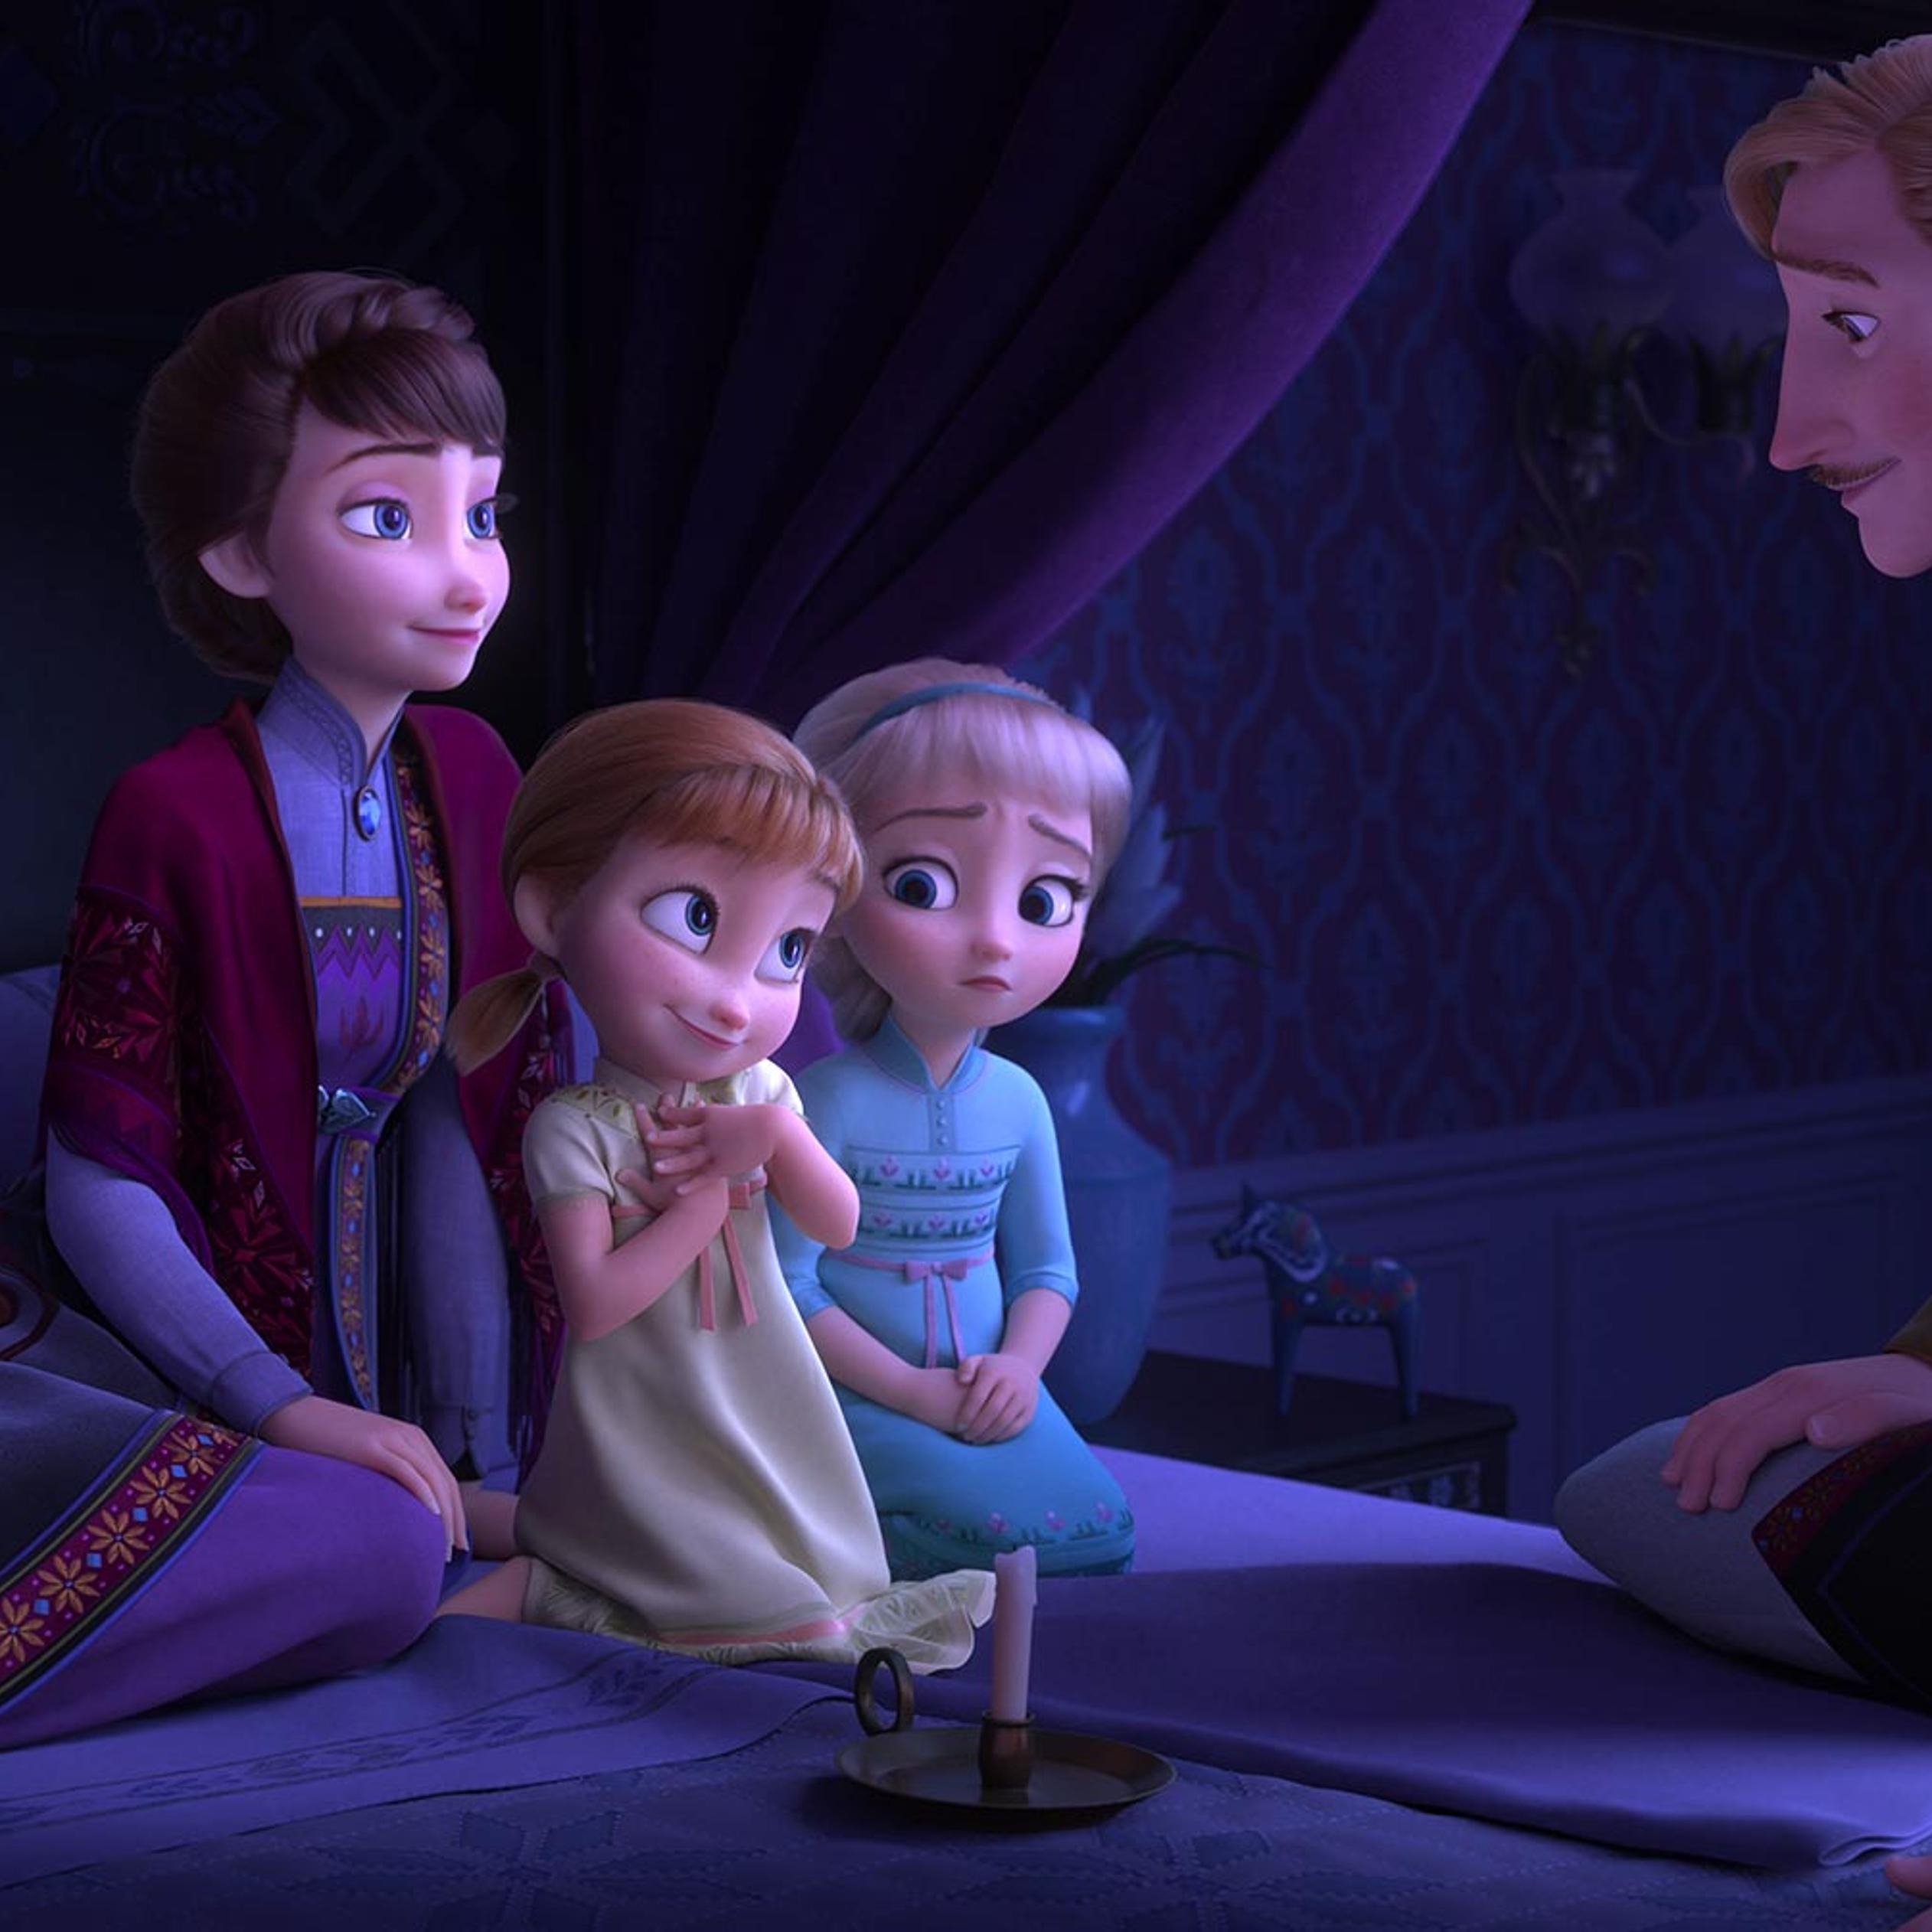 Frozen 2 scene - Anna and Elsa with parents